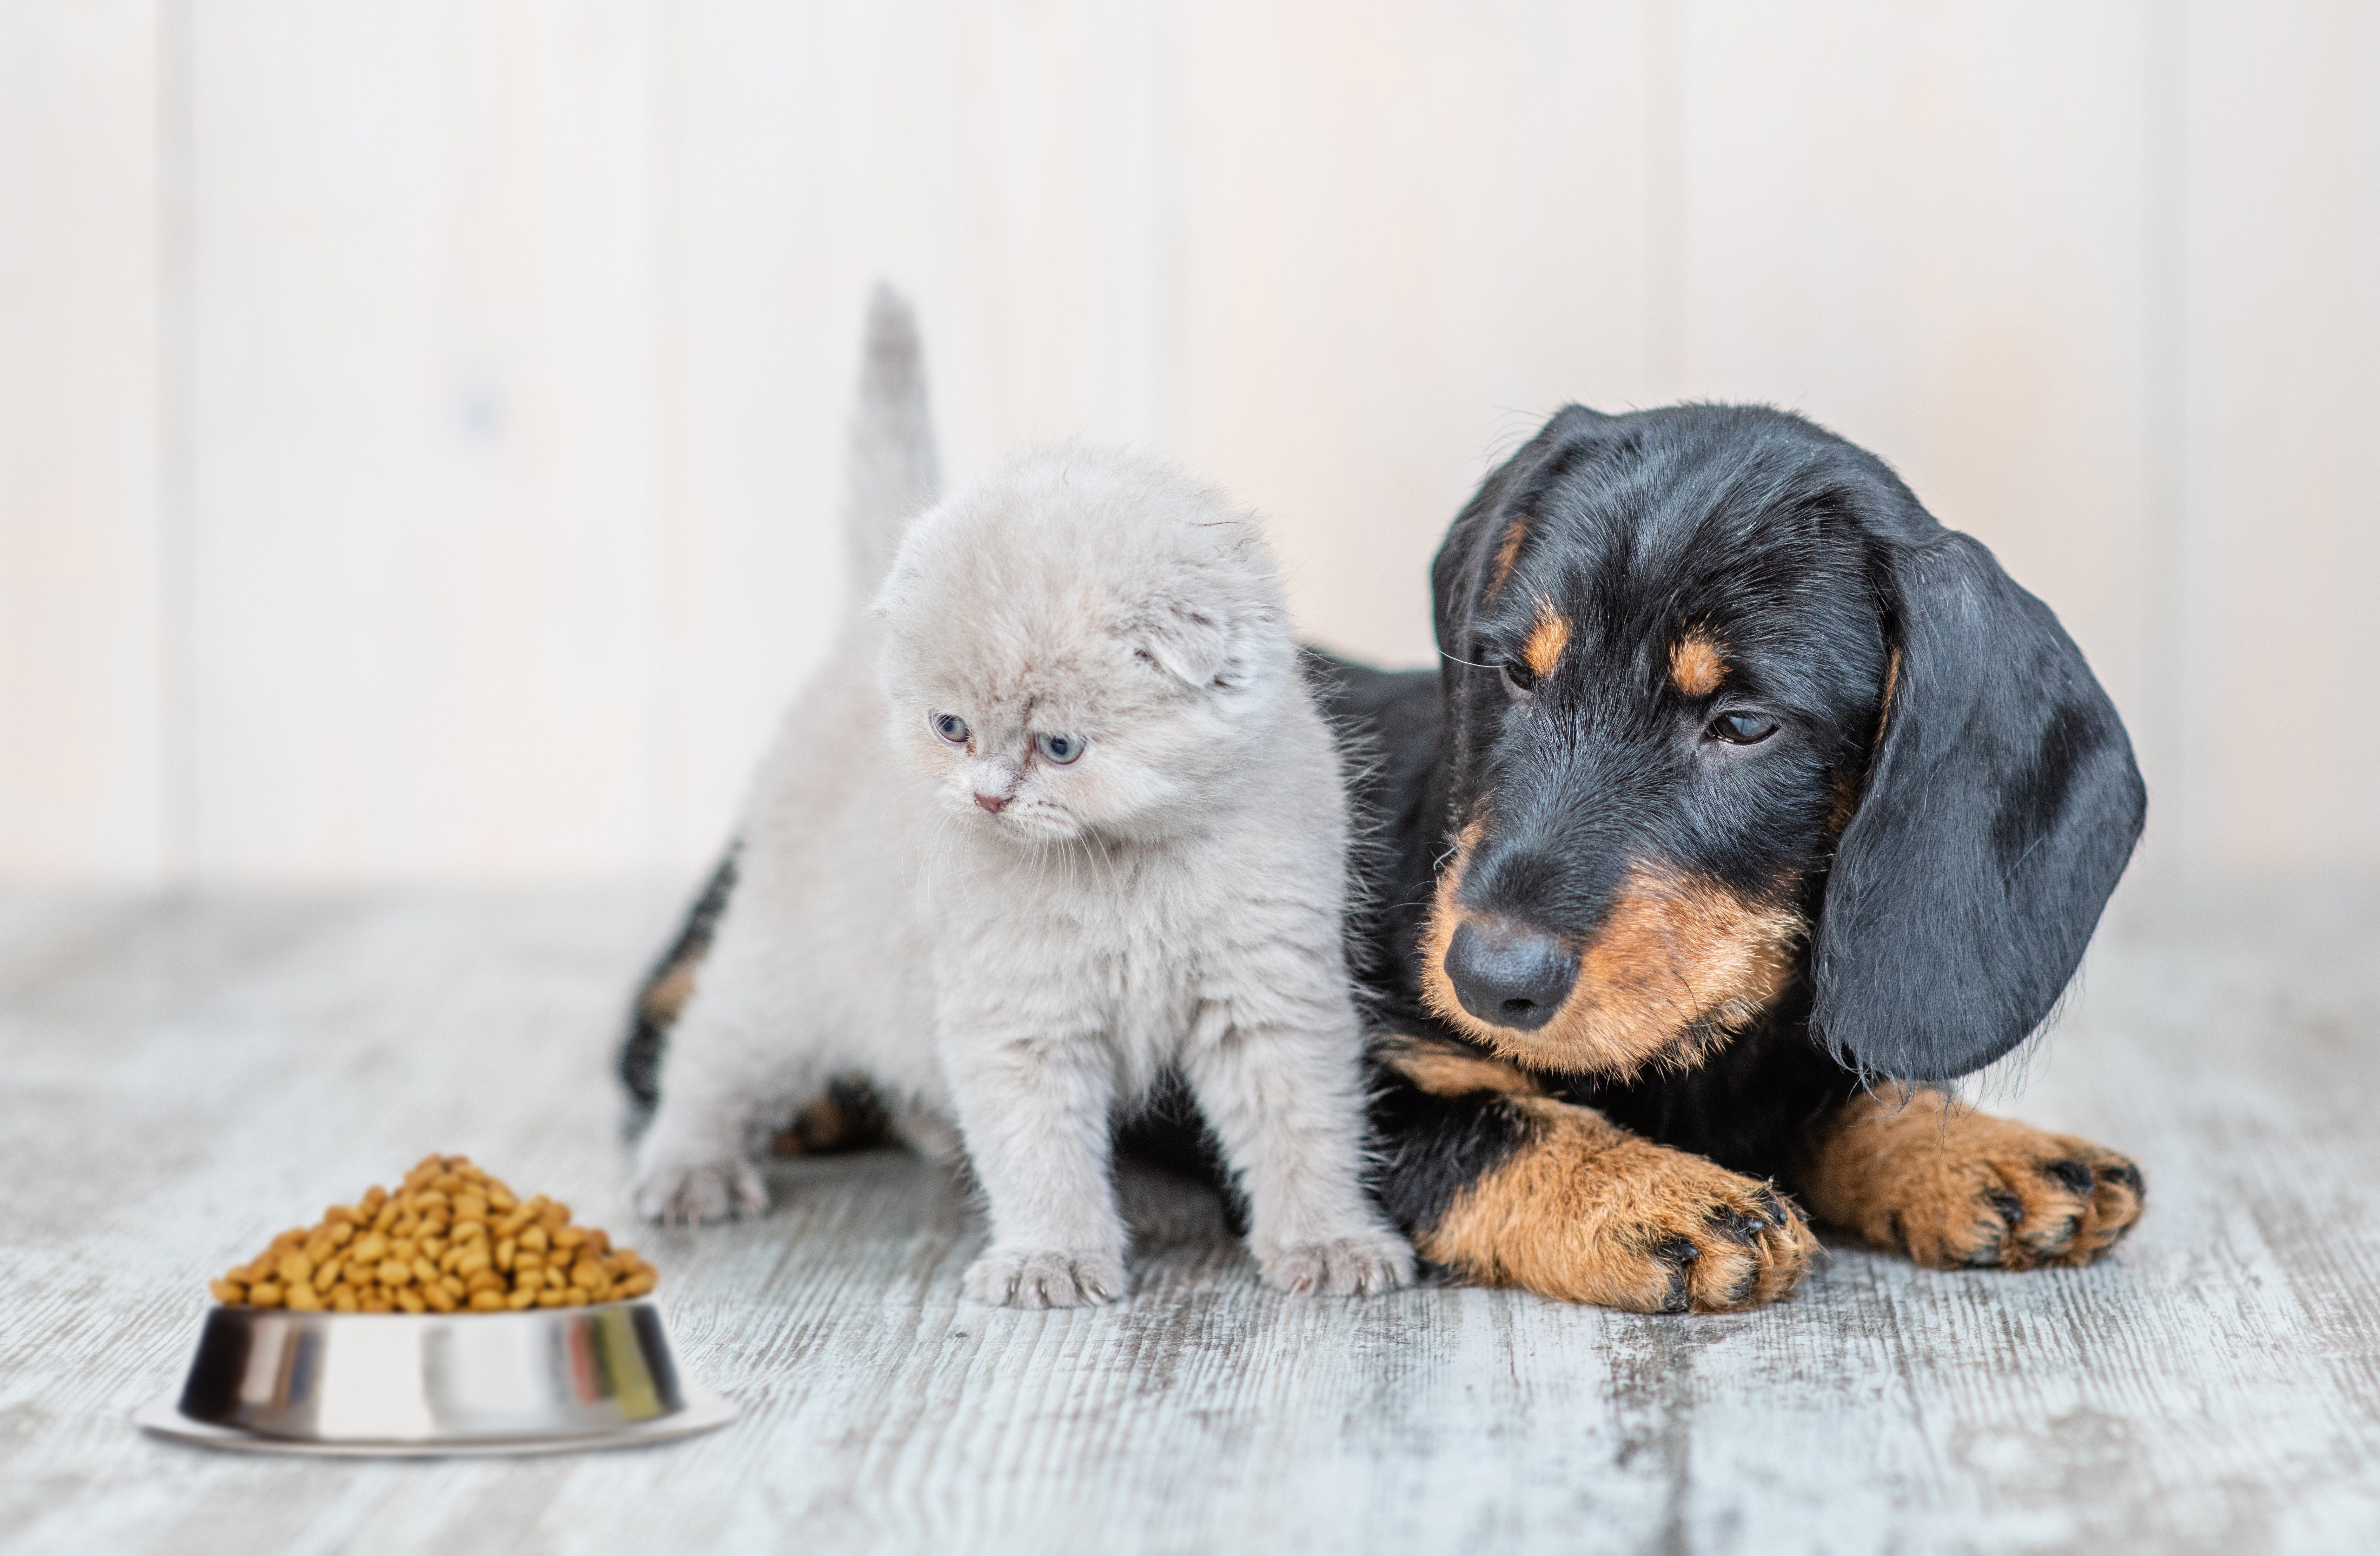 Cute baby kitten sitting with dachshund puppy on the floor at home and looking at a bowl of dry food